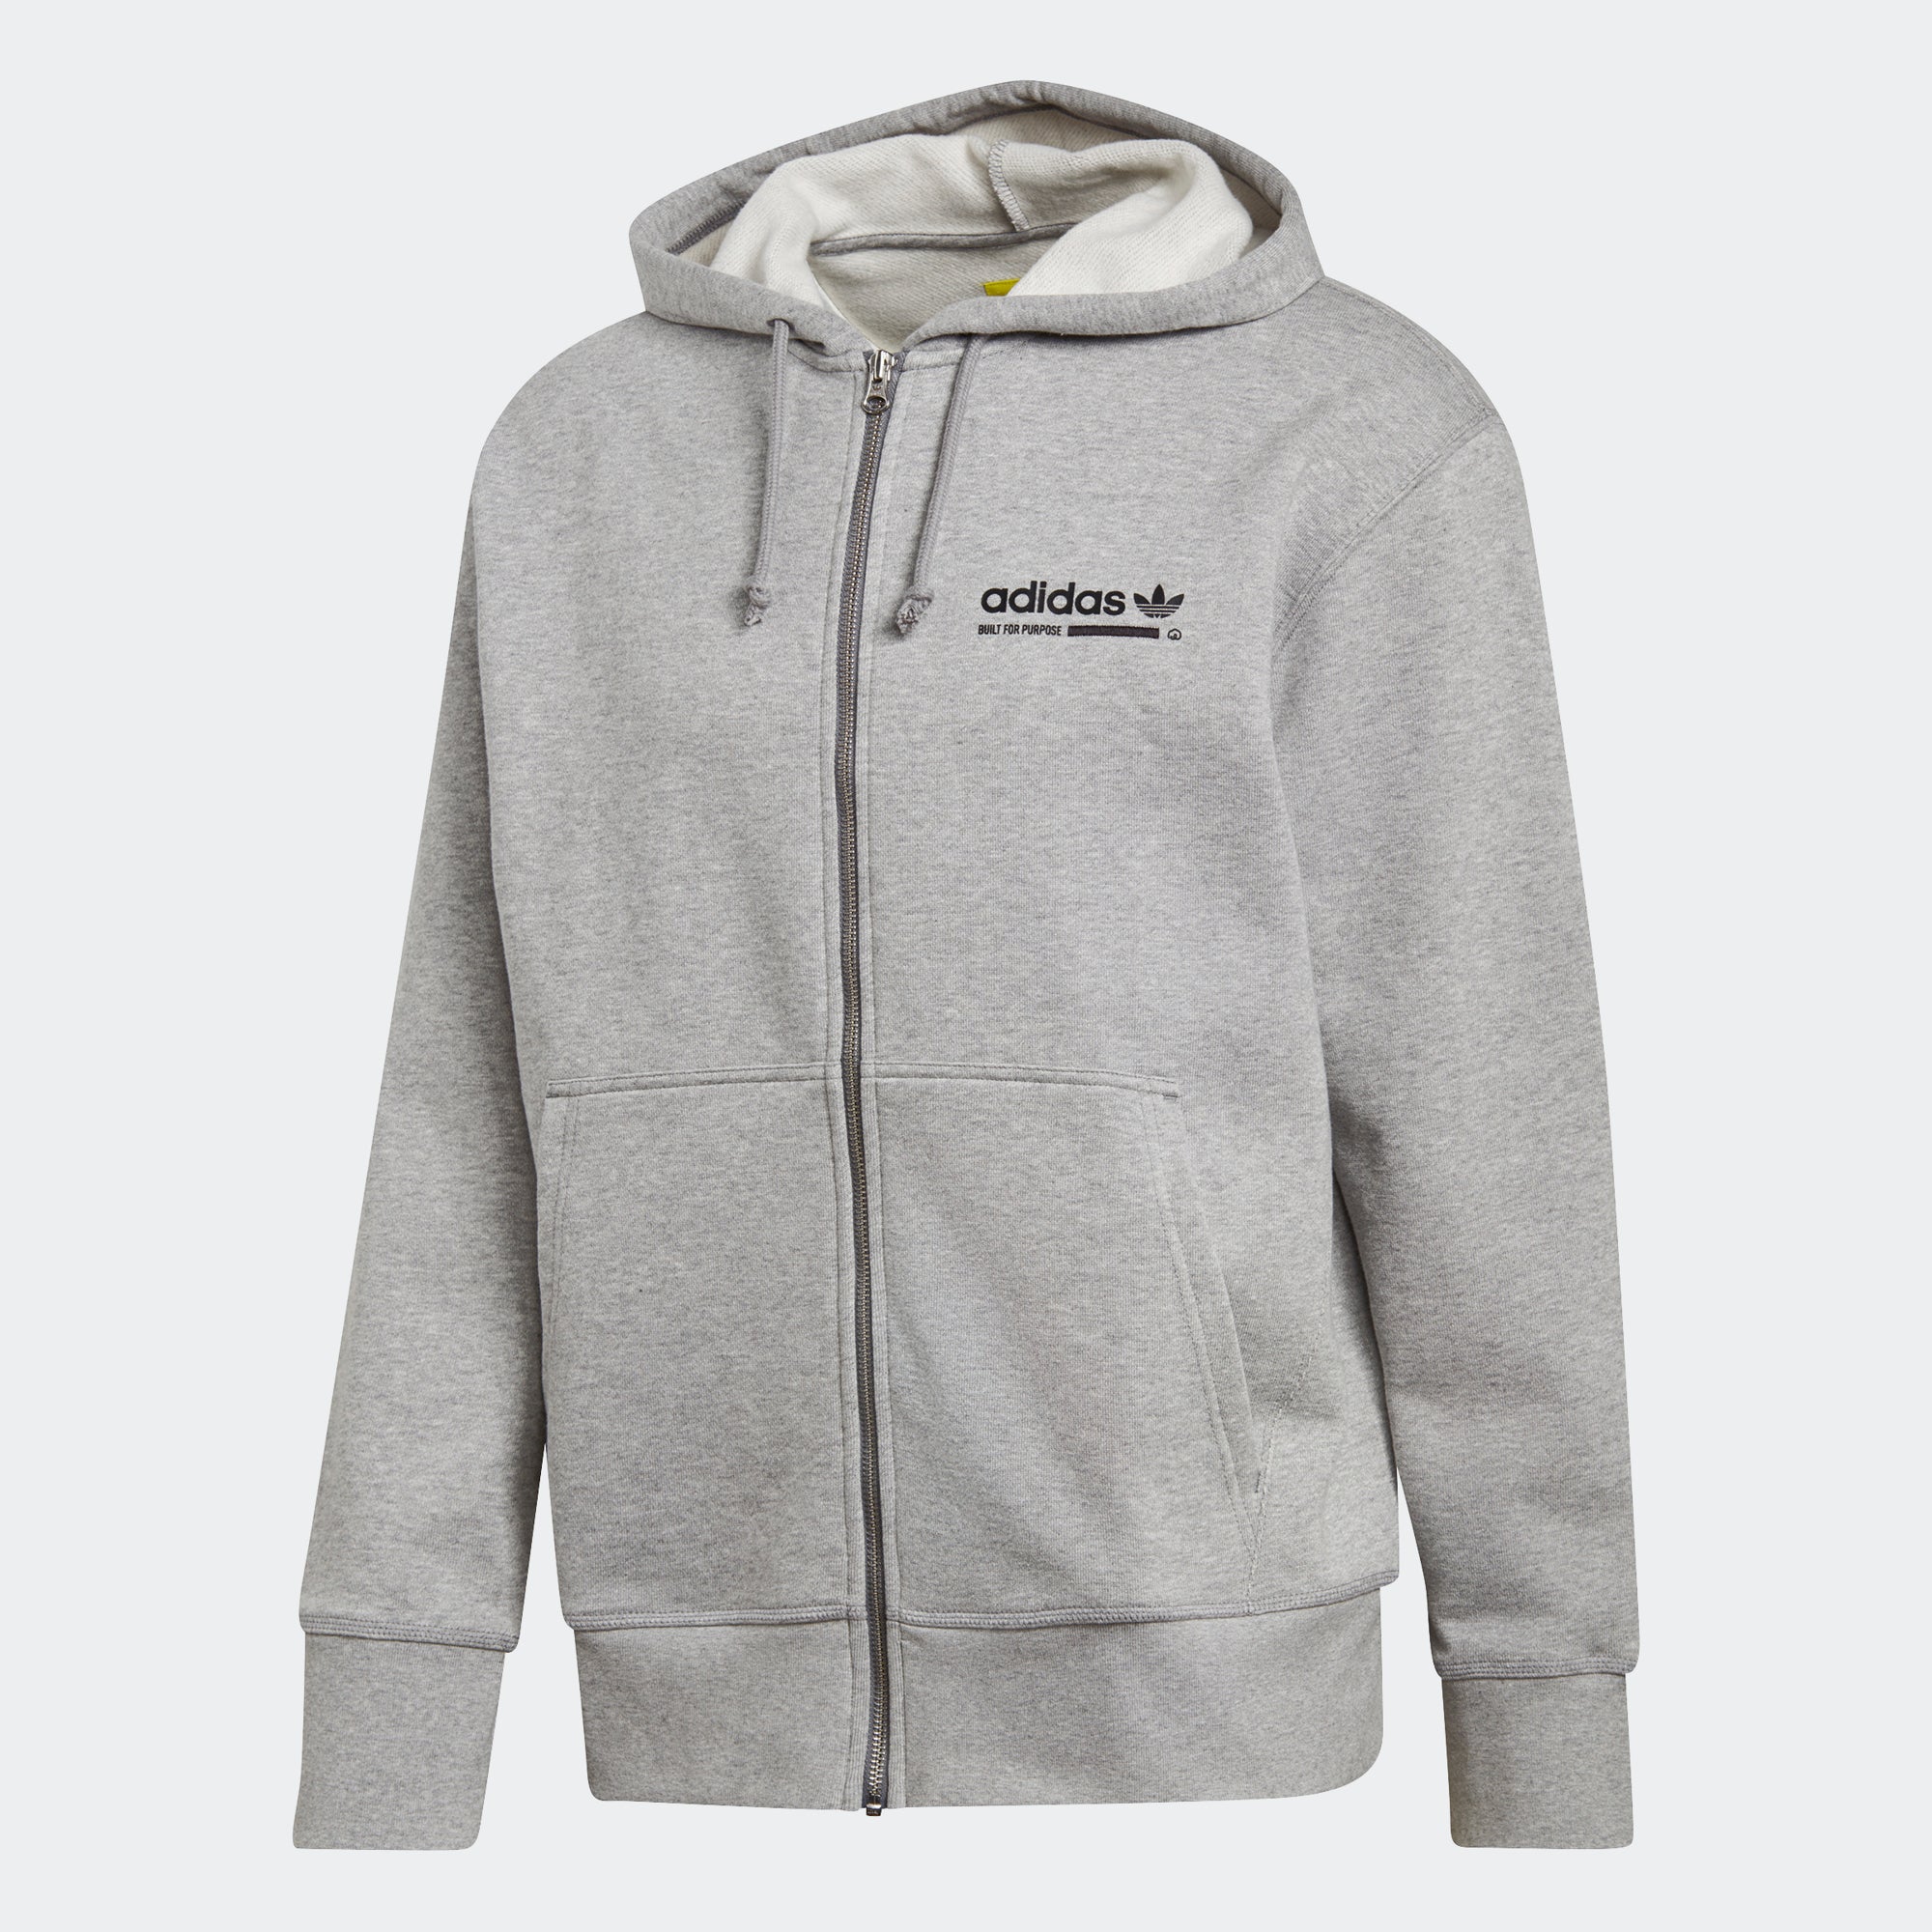 adidas Kaval Hoodie Grey DH4990 | Chicago City Sports